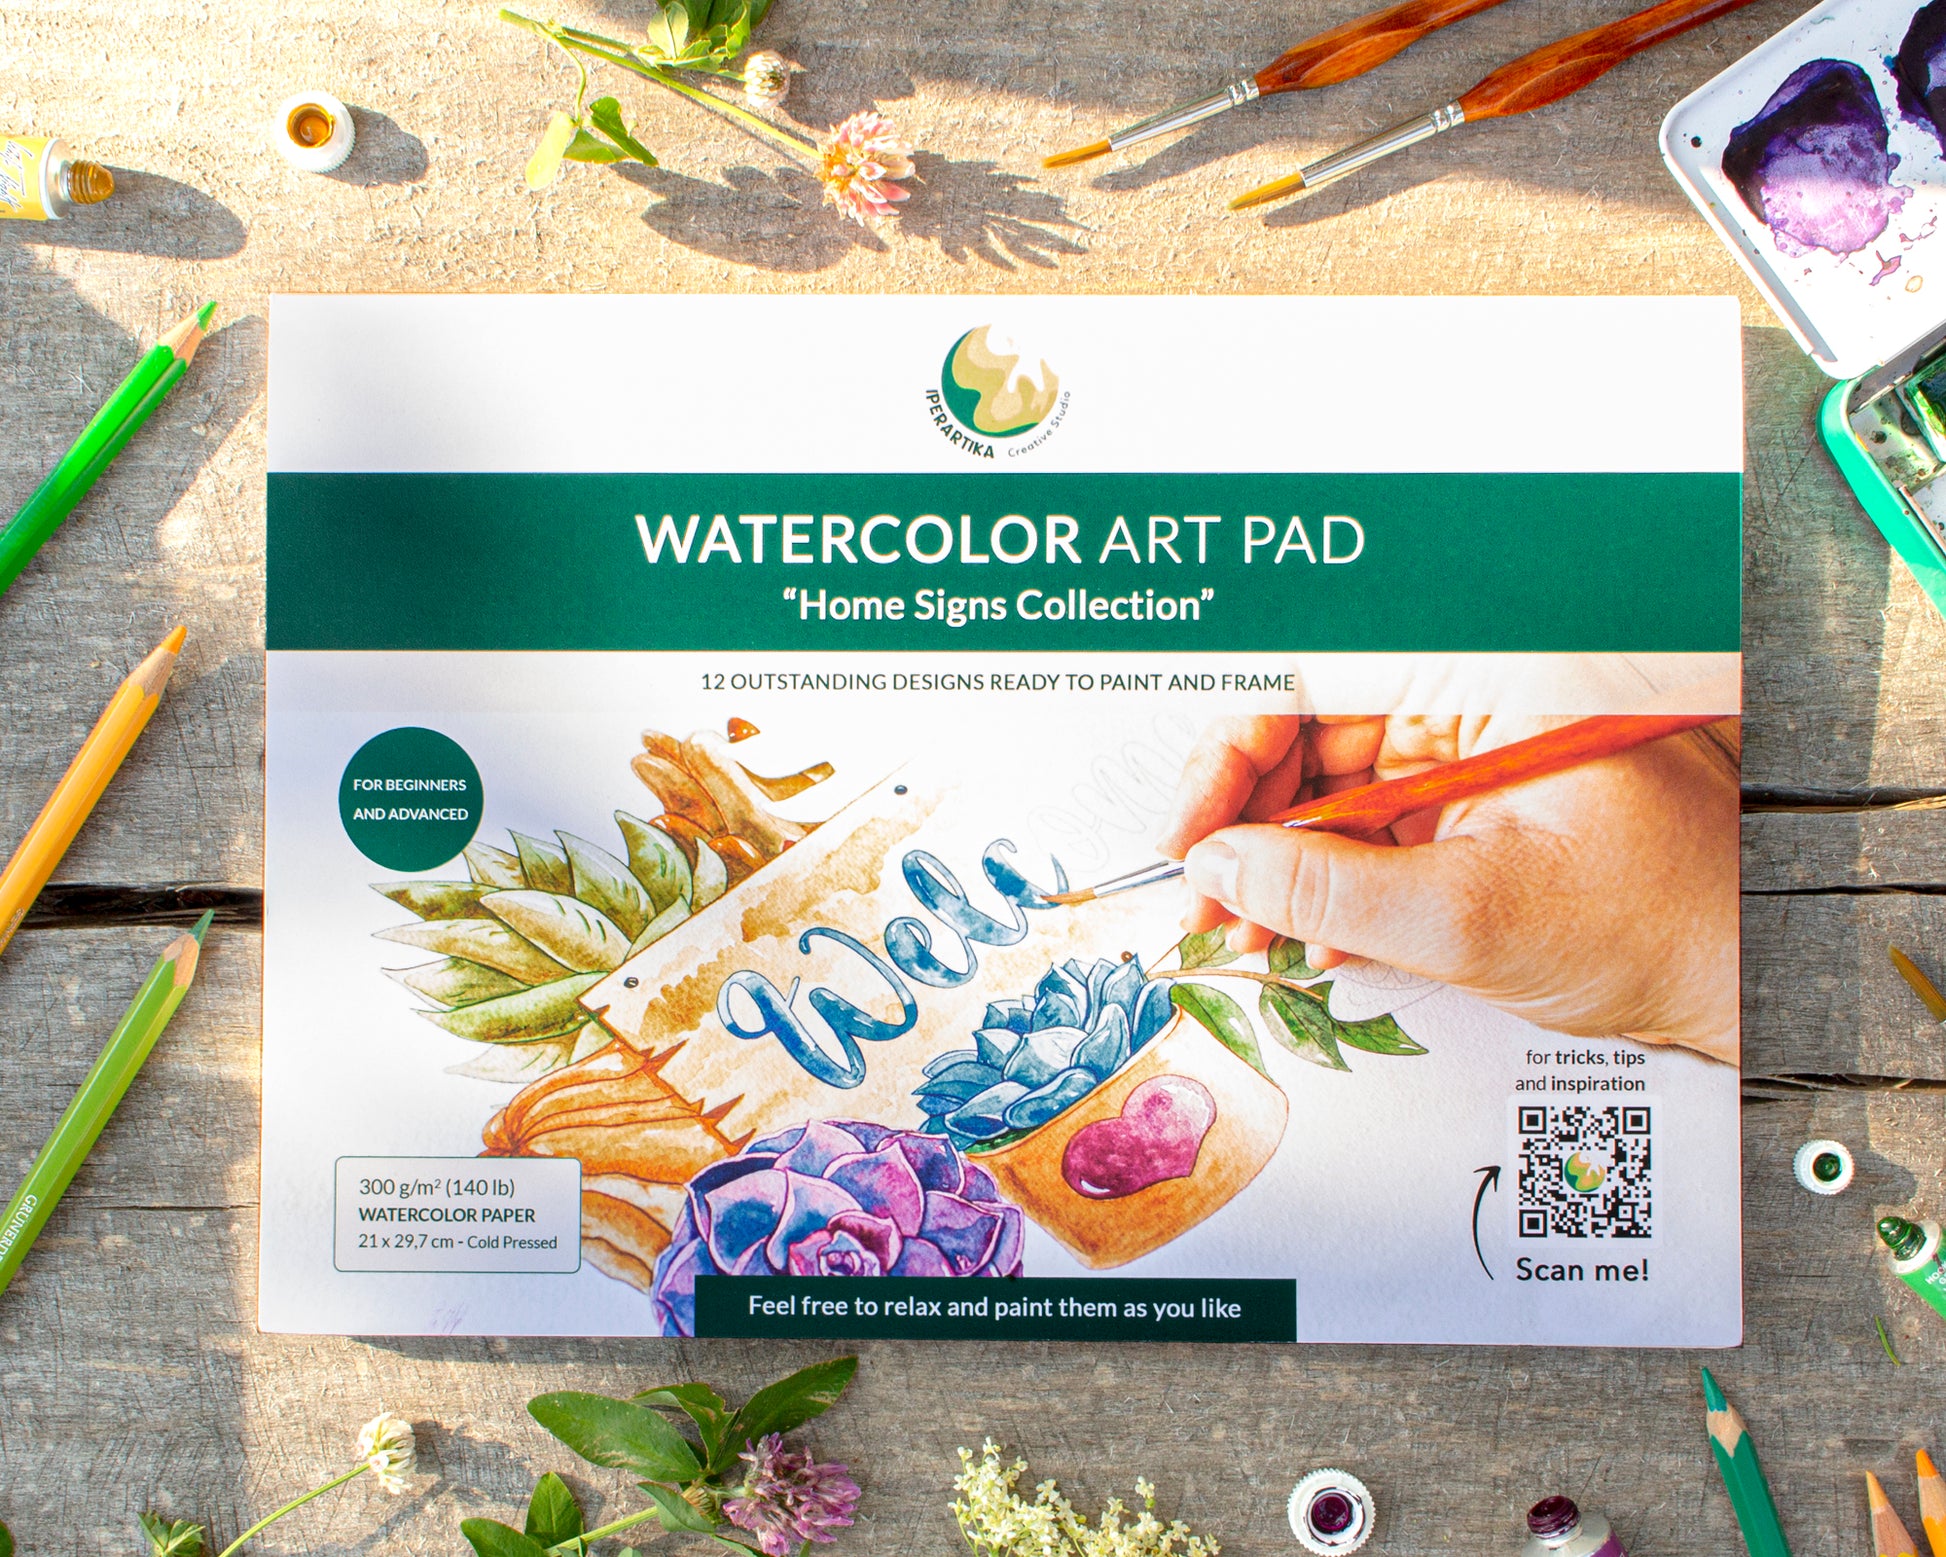 Creative Tips for Using Watercolor in Coloring Books for Adults 